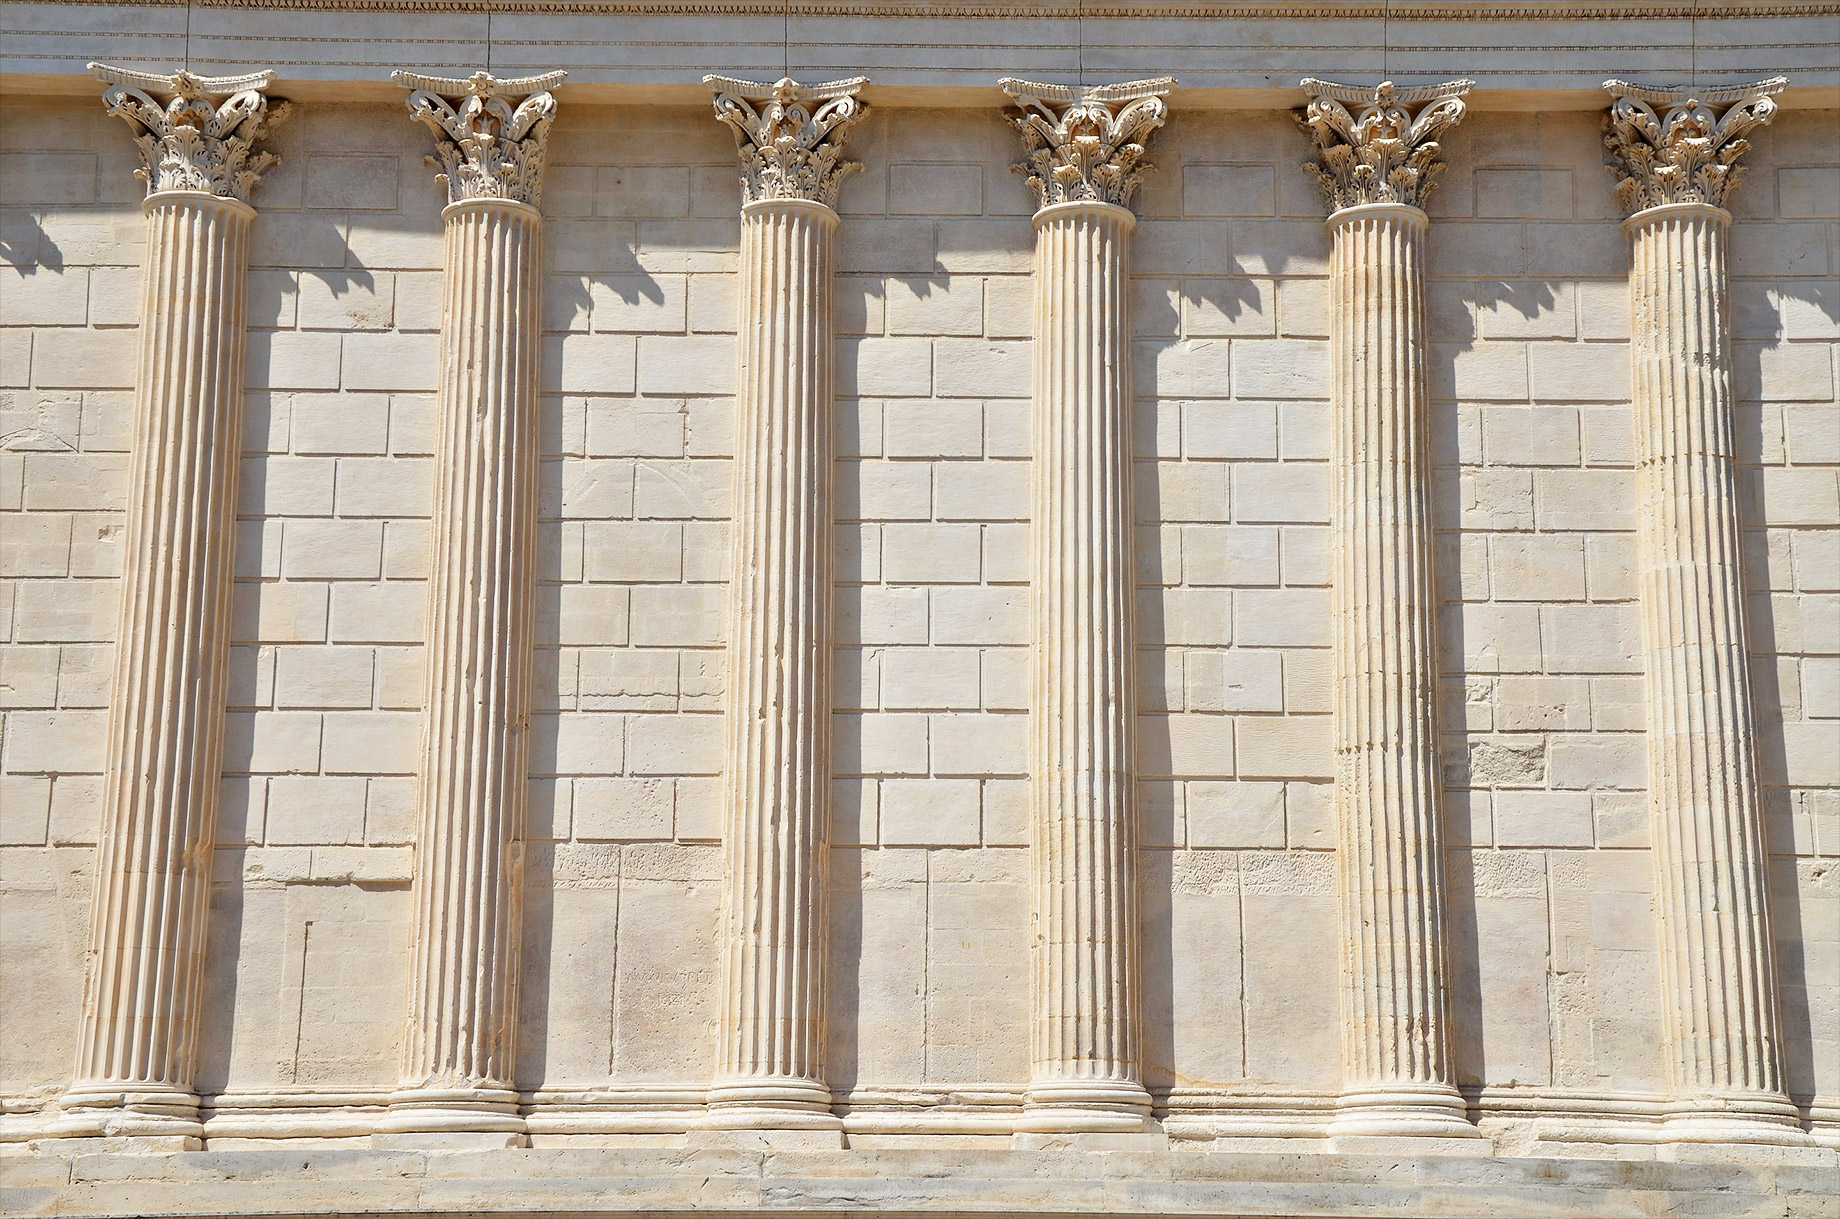 Engaged Columns Embedded in the Side Wall of the Cella of the Maison Carrée in Nîmes, France